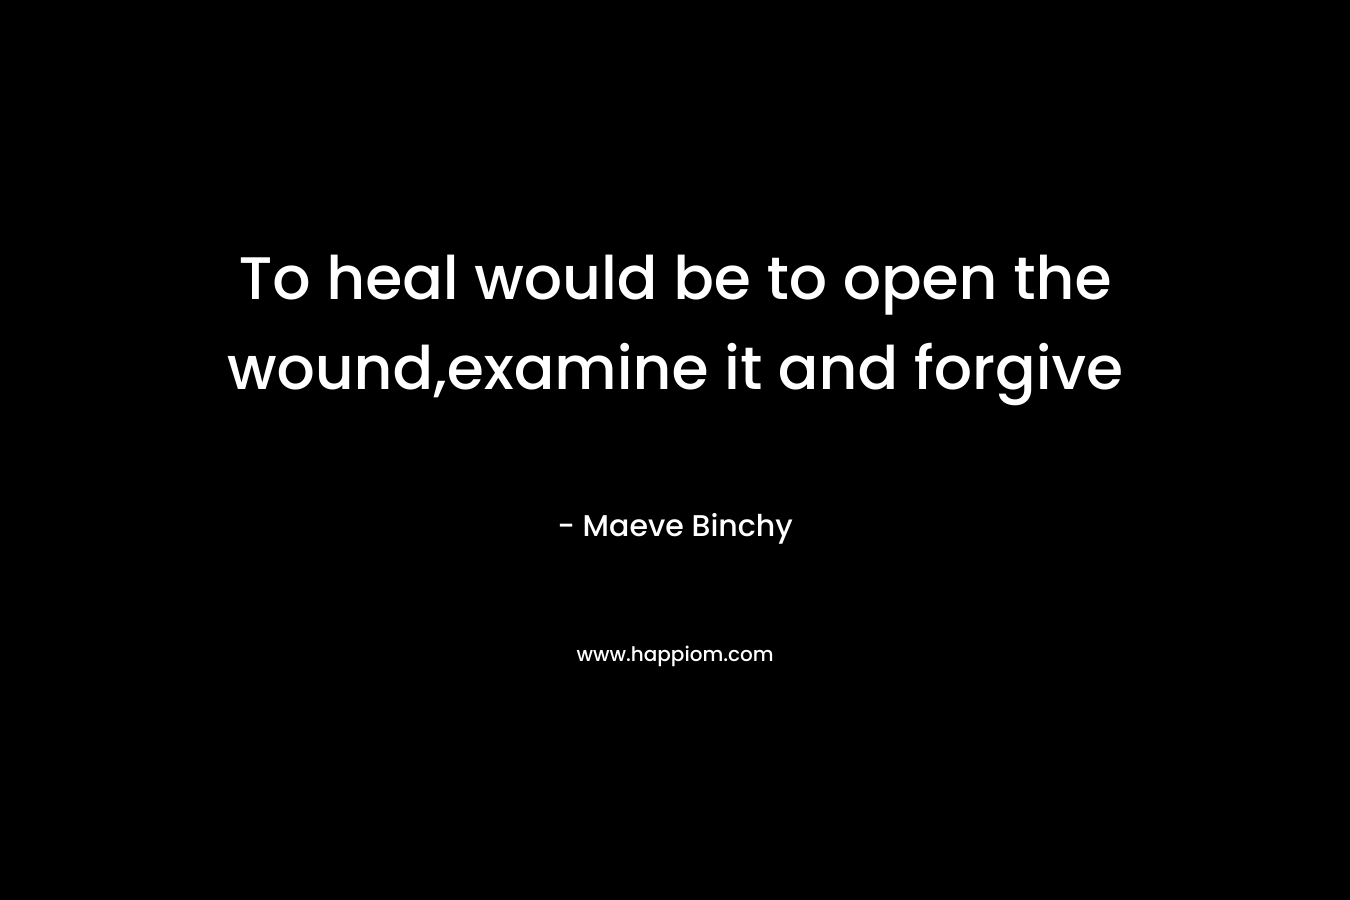 To heal would be to open the wound,examine it and forgive